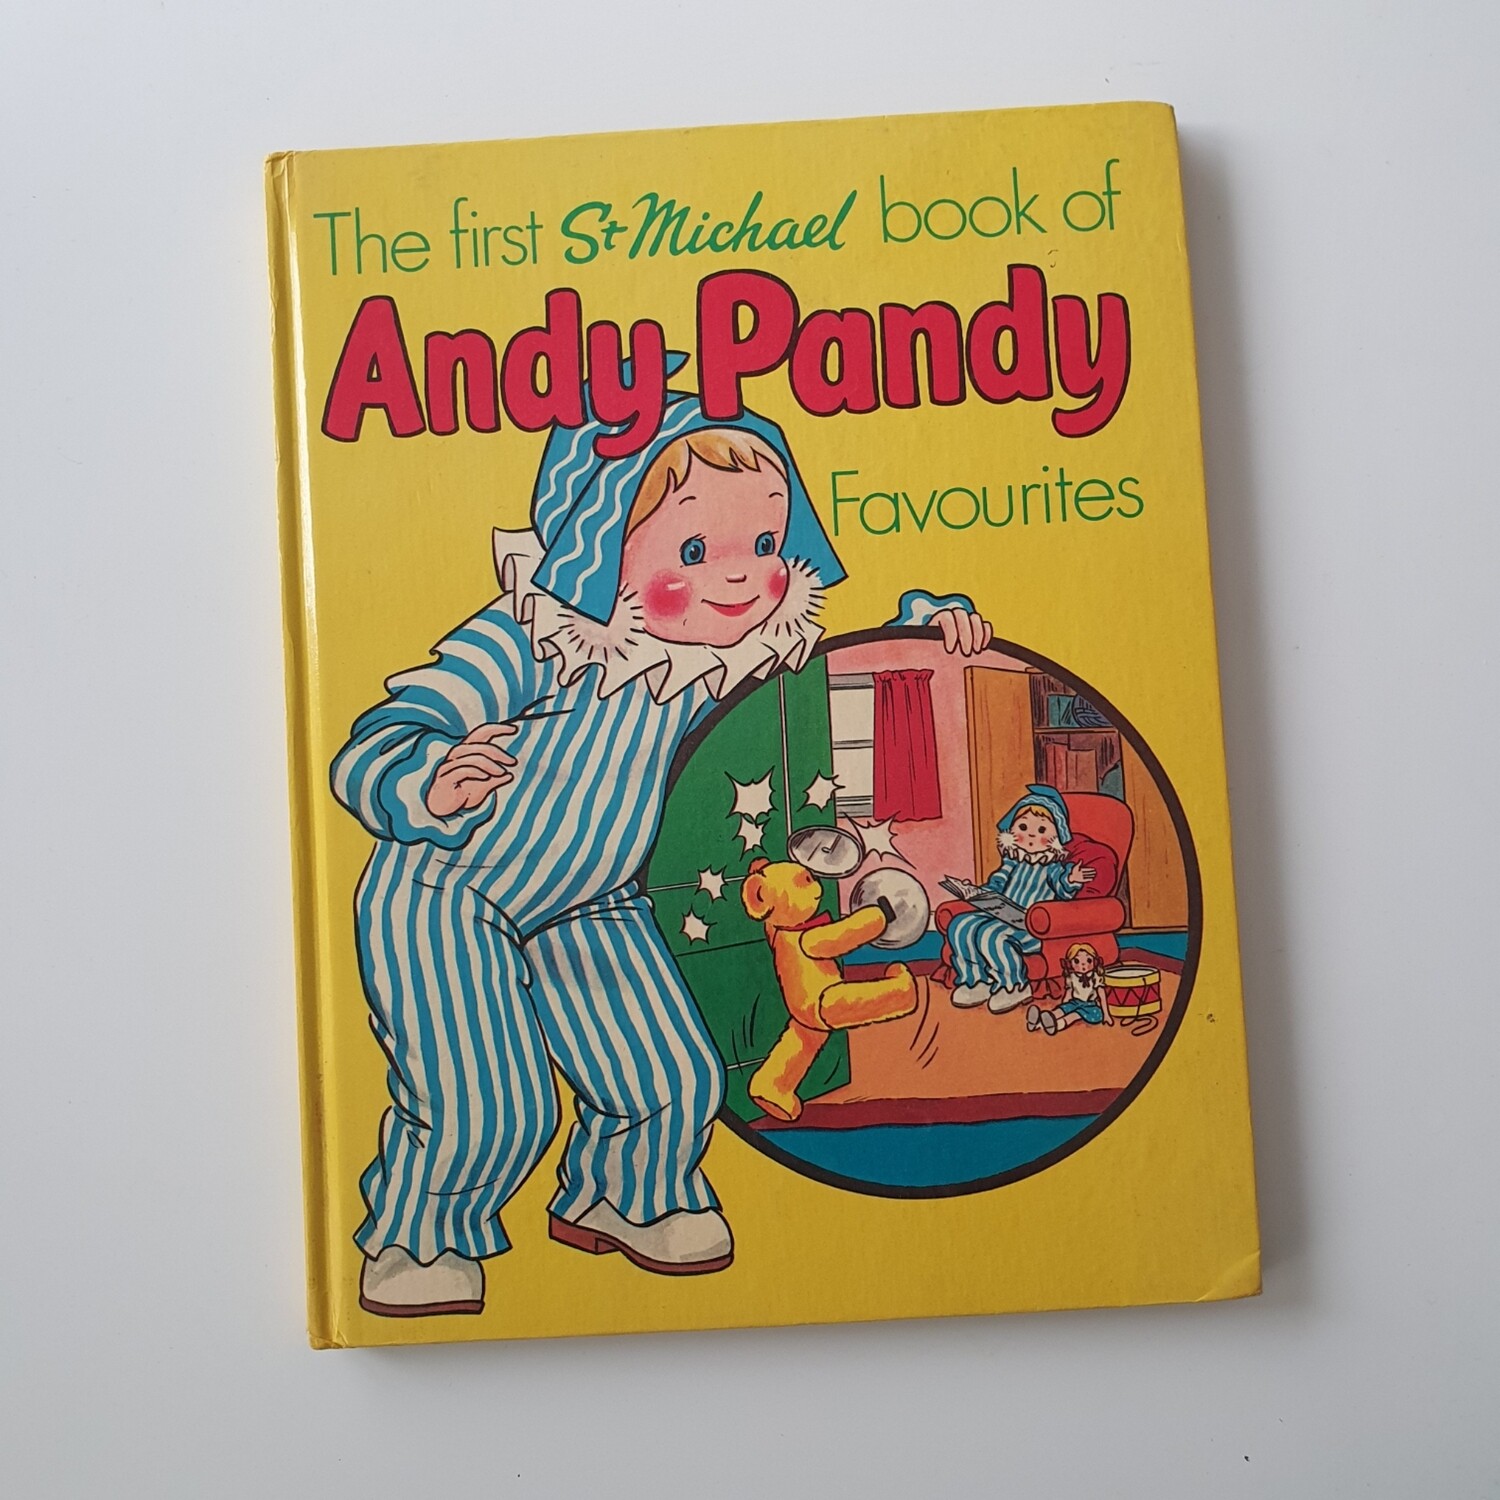 Andy Pandy Favourites